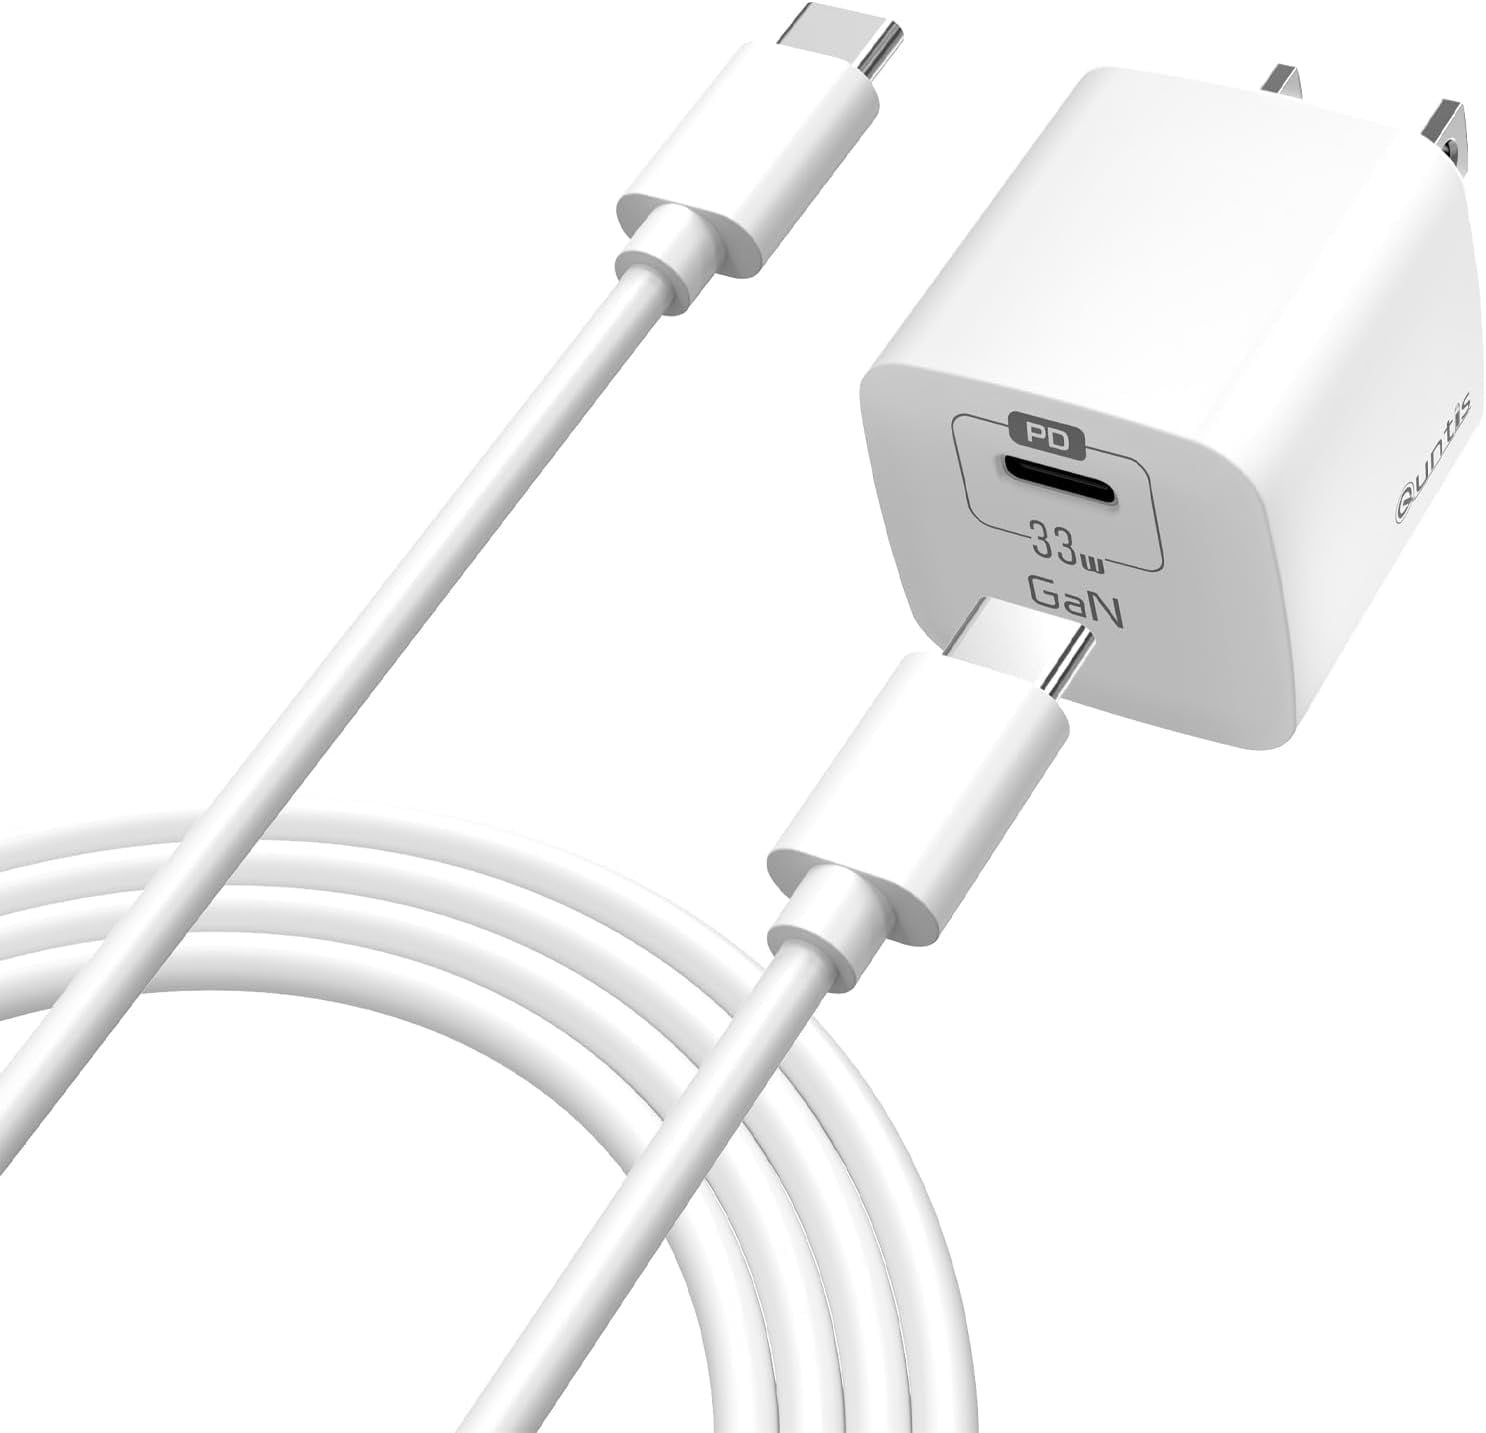  [MFI Certified] iPhone Charger Block USB C Fast Wall Plug with  6ft USB C to Lightning Cable for i Phone/14/13/12/11/pro/pro max/Air pods  pro/iPad air 3/min4 (White, 6FT 1 Pack) : Cell